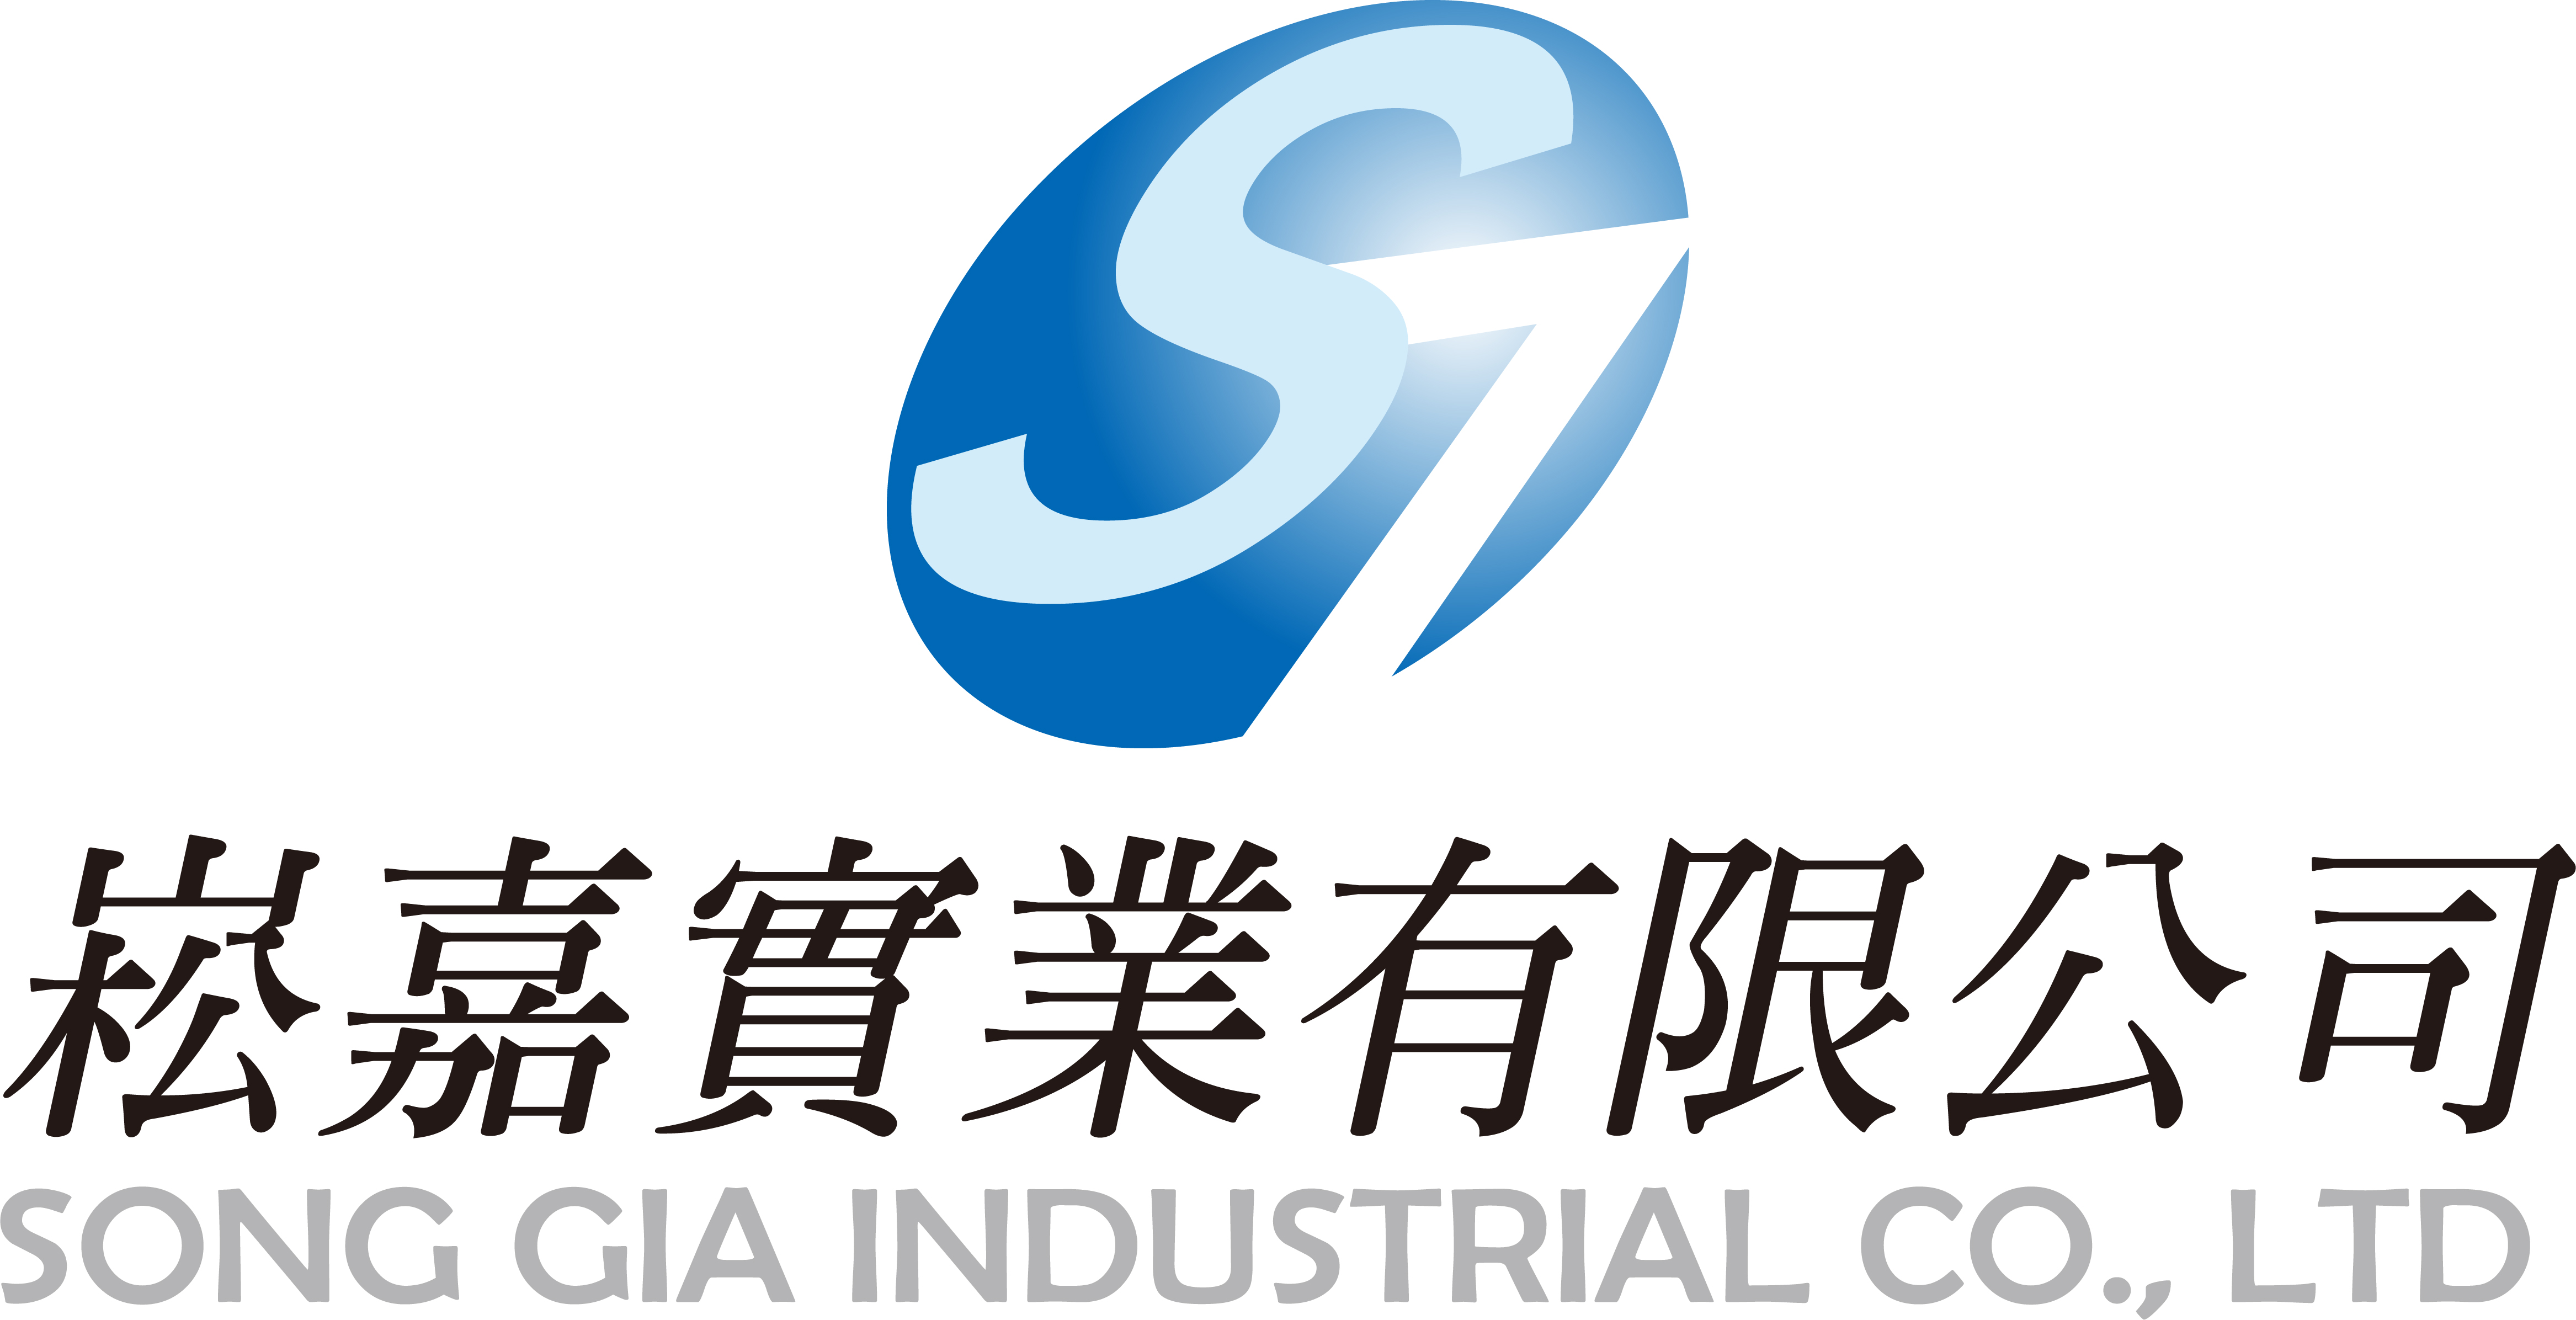 SONG GIA INDUSTRIAL CO., LTD